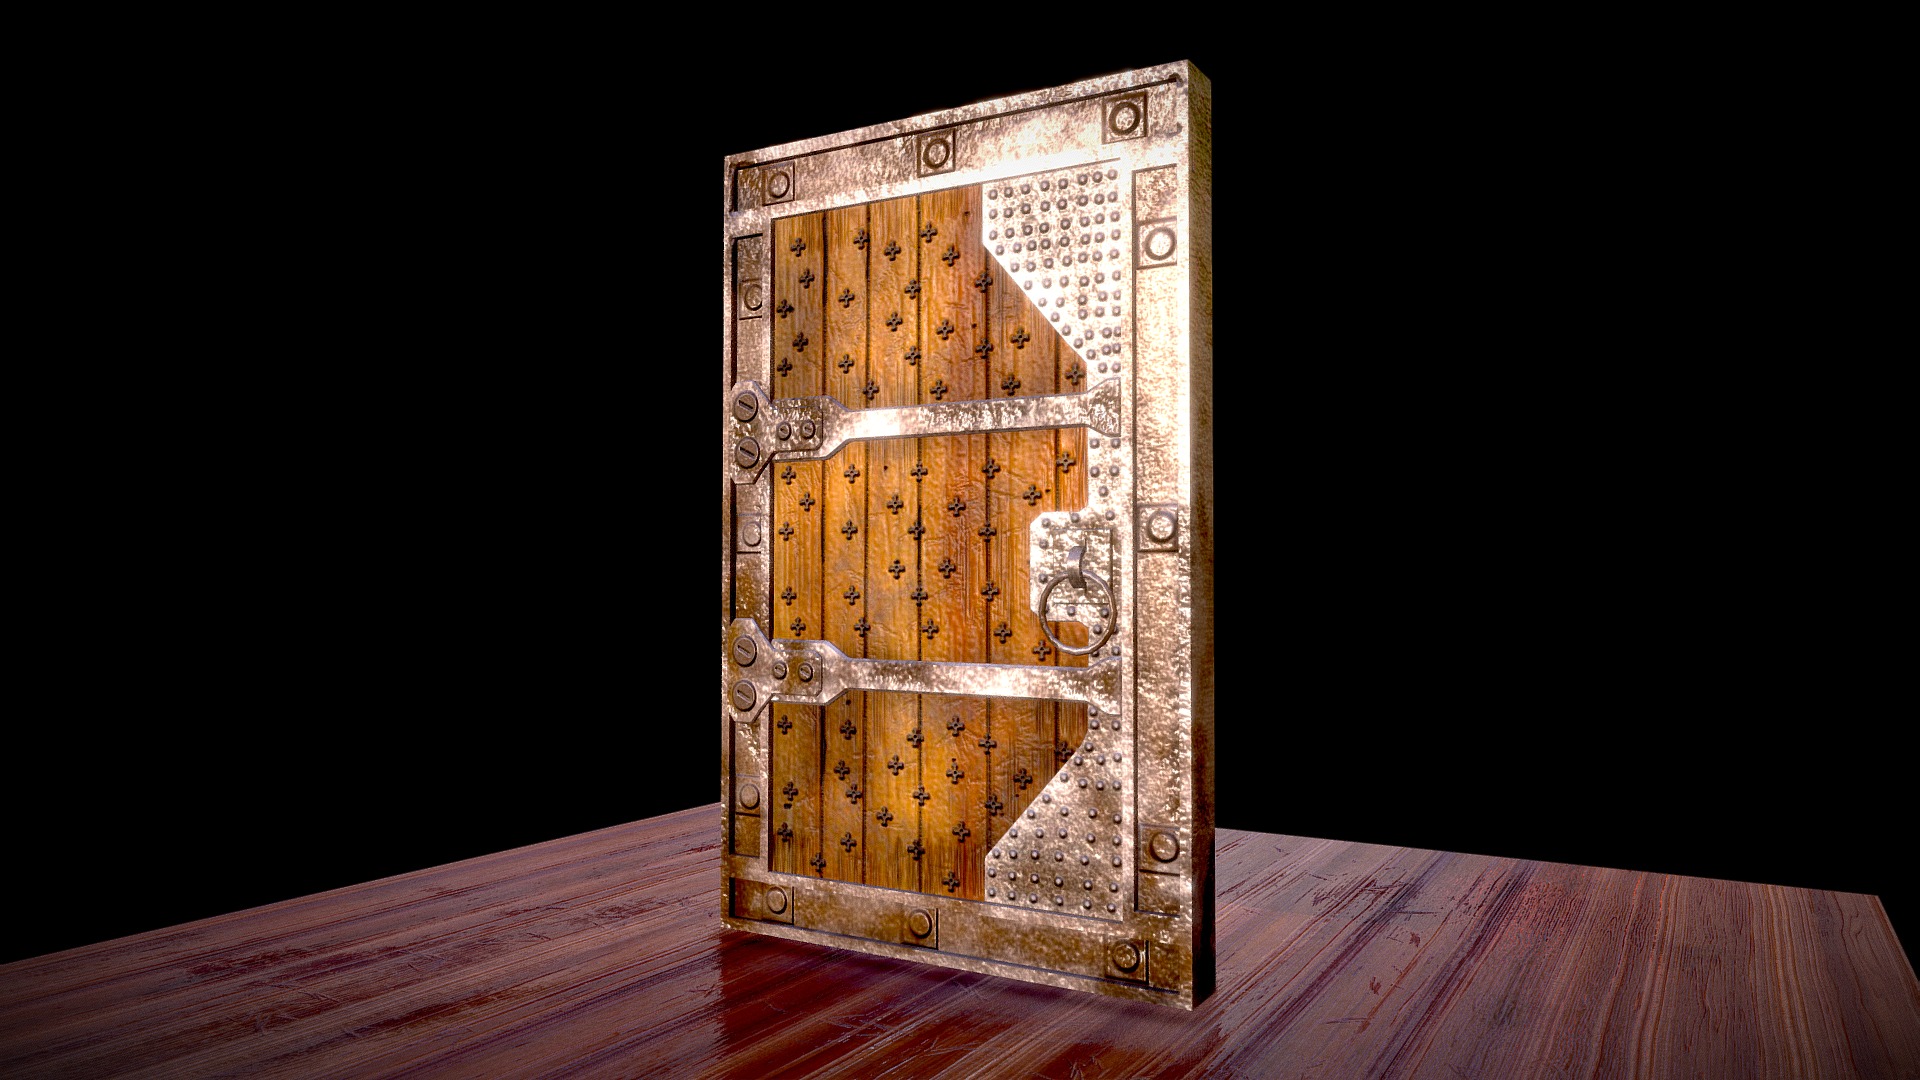 3D model Gears Of  War Asset #3 Wood Door - This is a 3D model of the Gears Of  War Asset #3 Wood Door. The 3D model is about a wooden box with a metal handle.